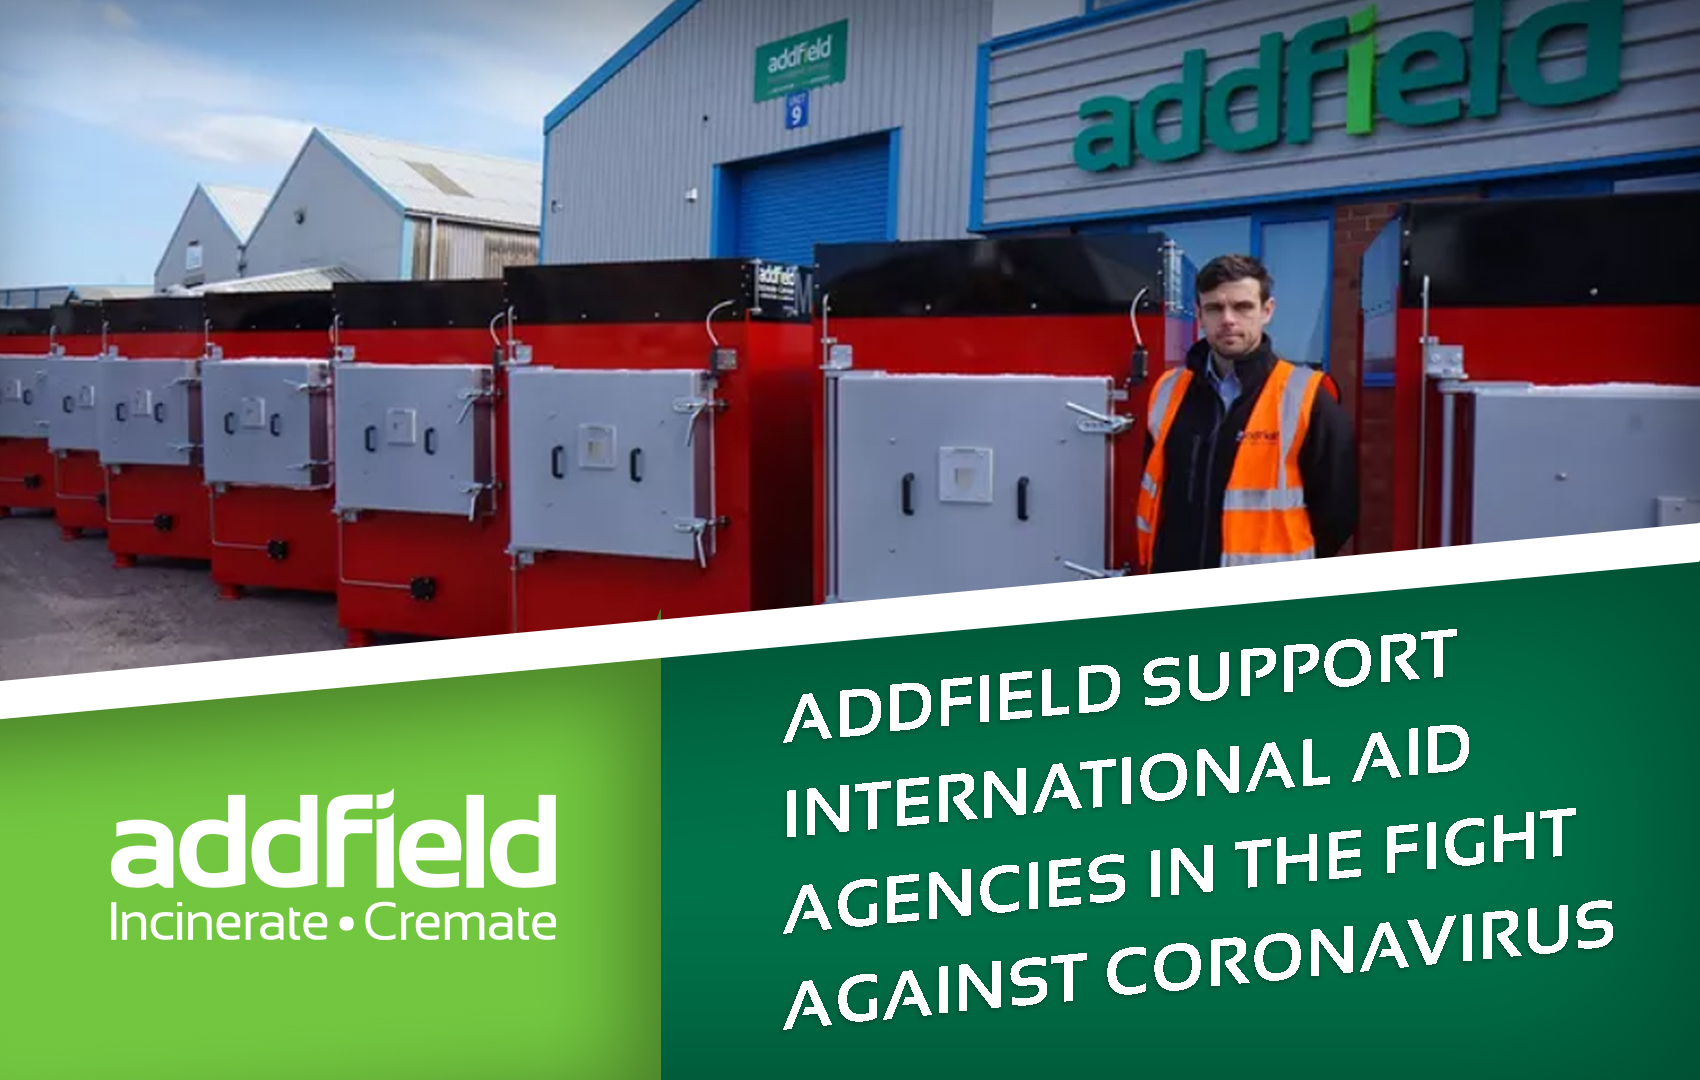 Derek with medical incinerators for aid agencies to combat COVID 19